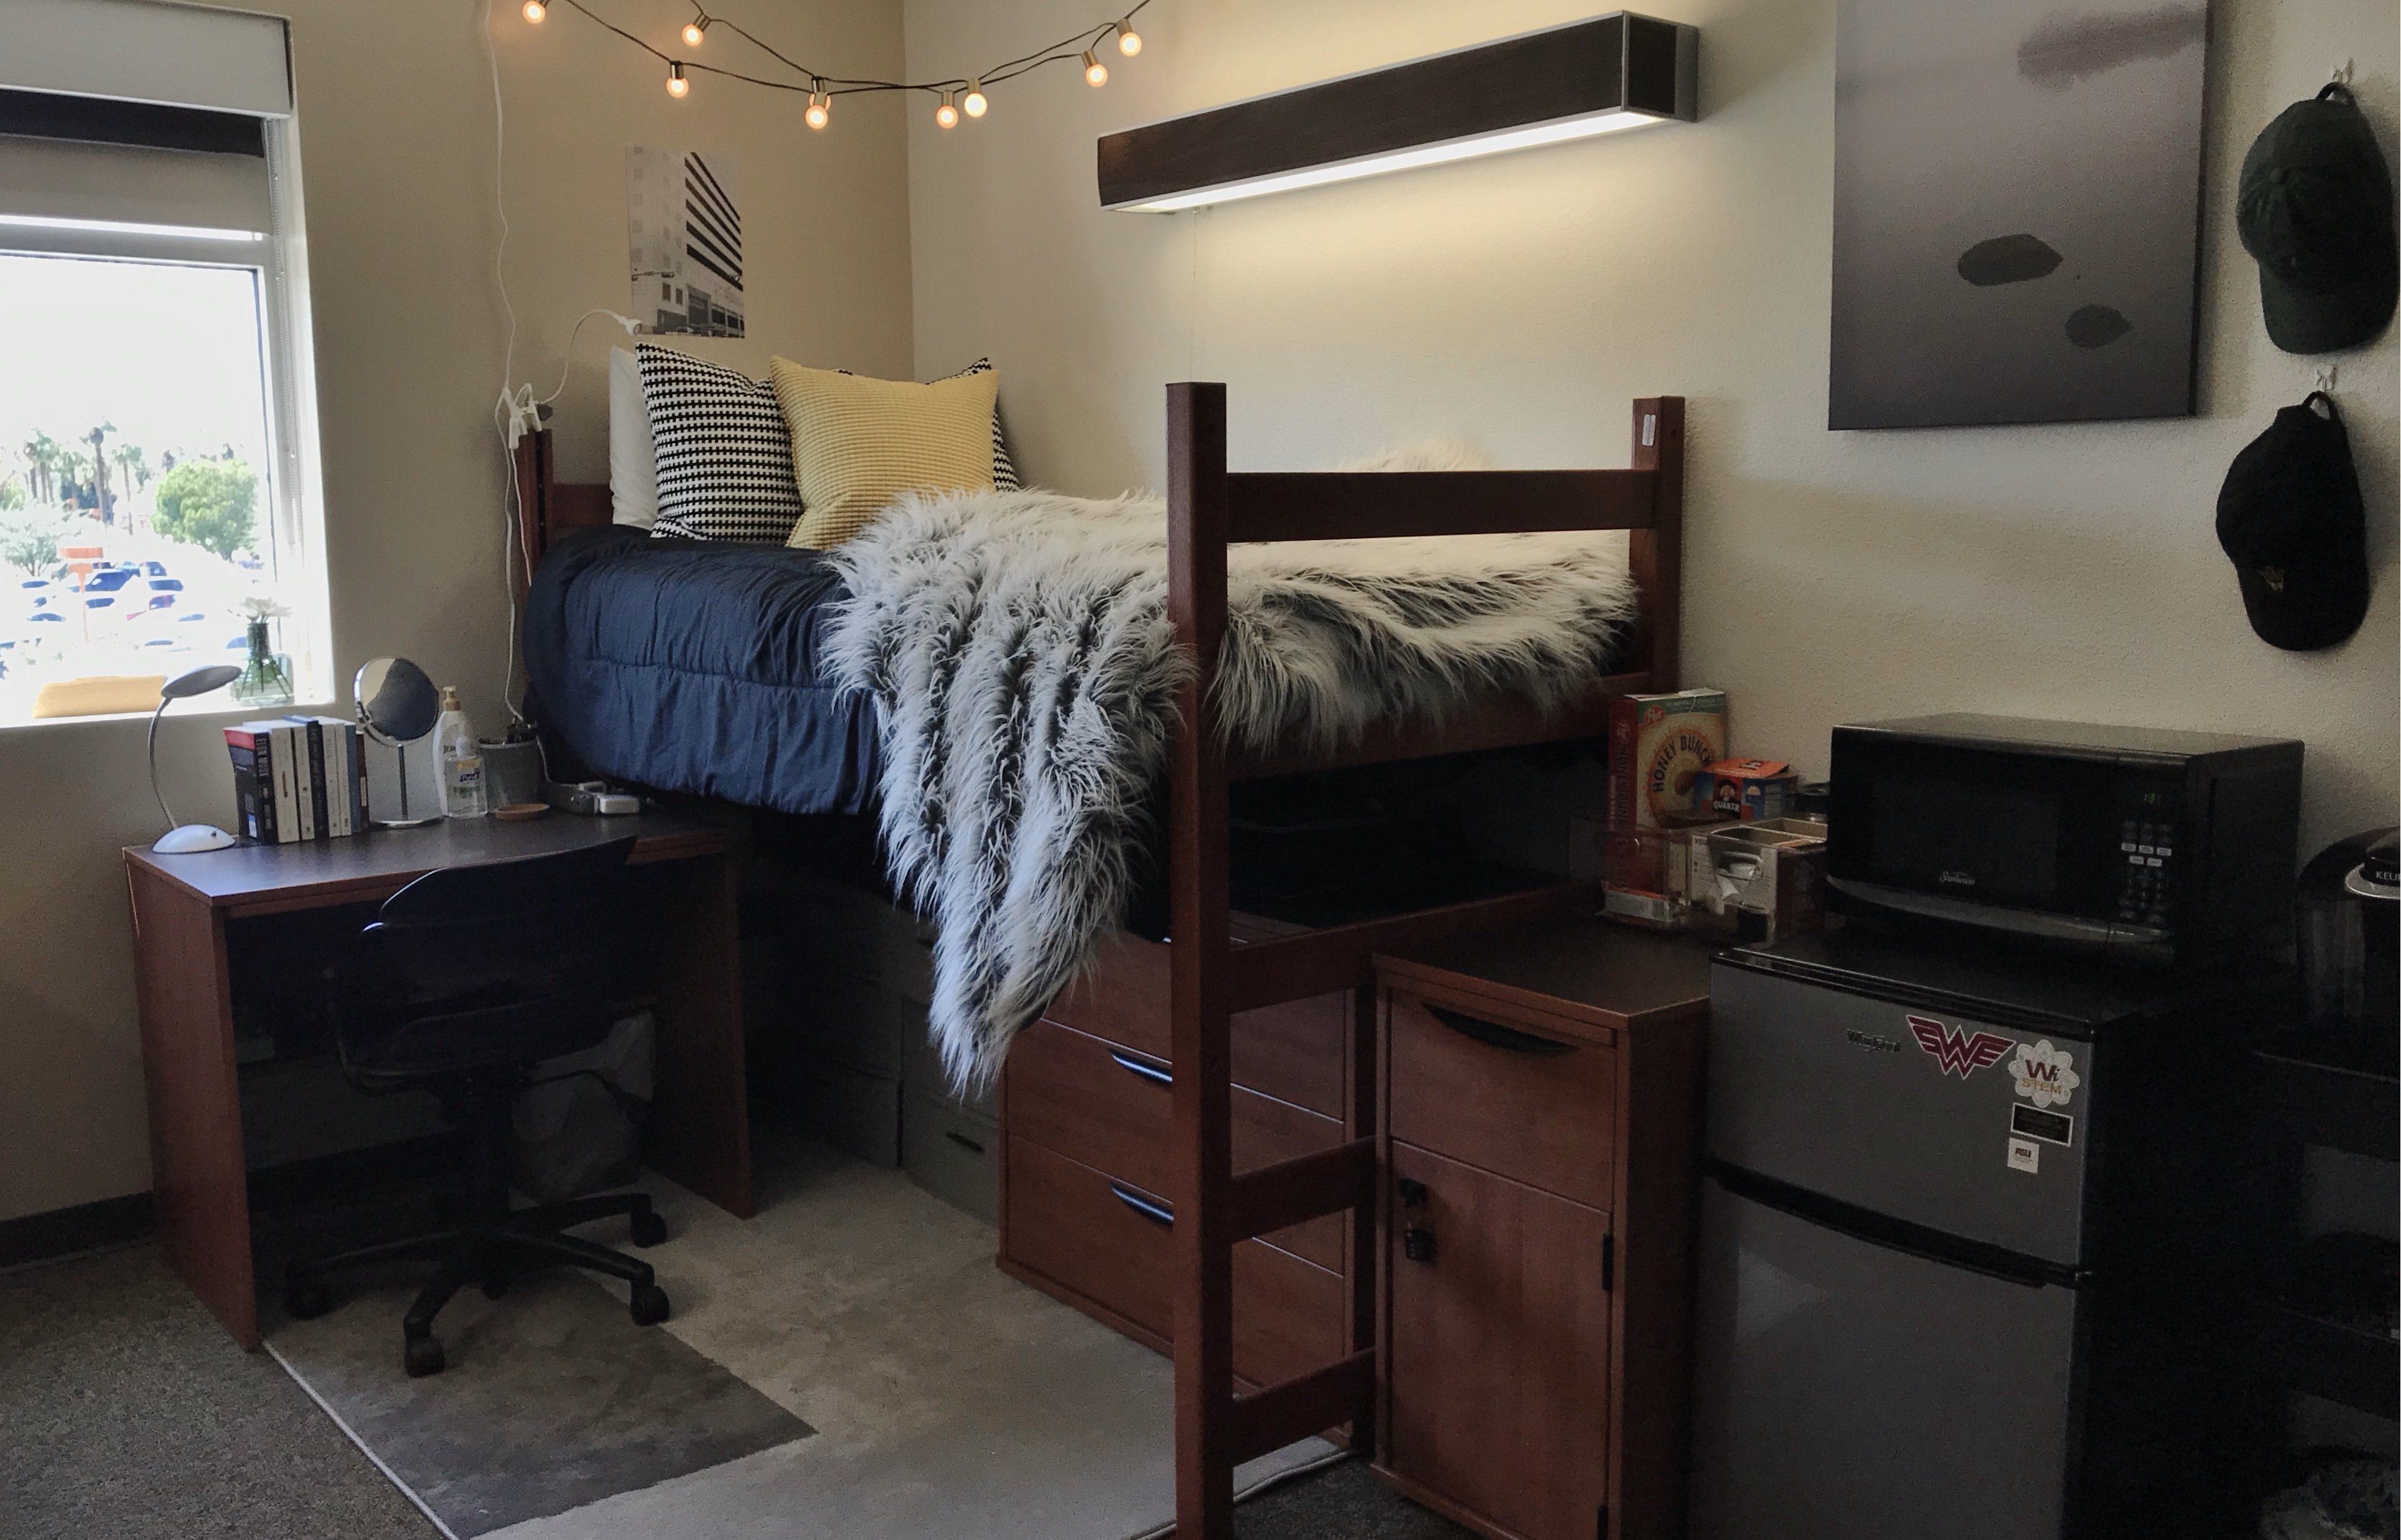 Tips for Organizing Your Child's College Dorm Room